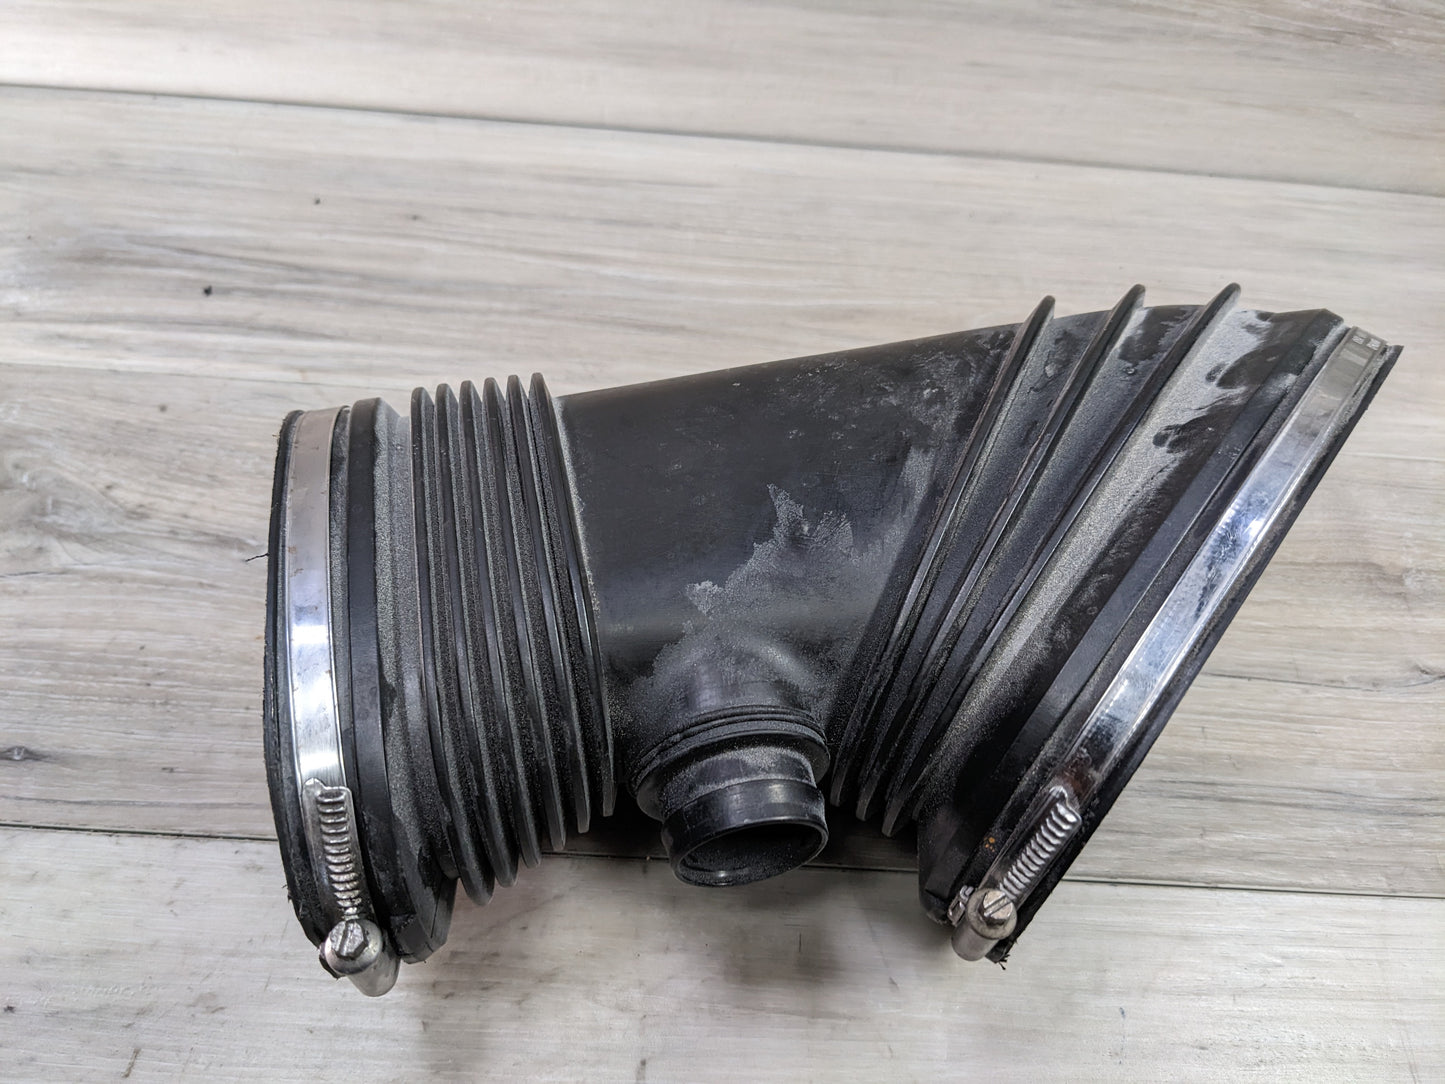 BMW 07-10 E93 M3 Engine Air intake Rubber Boot Airbox Tube Duct Pre LCI